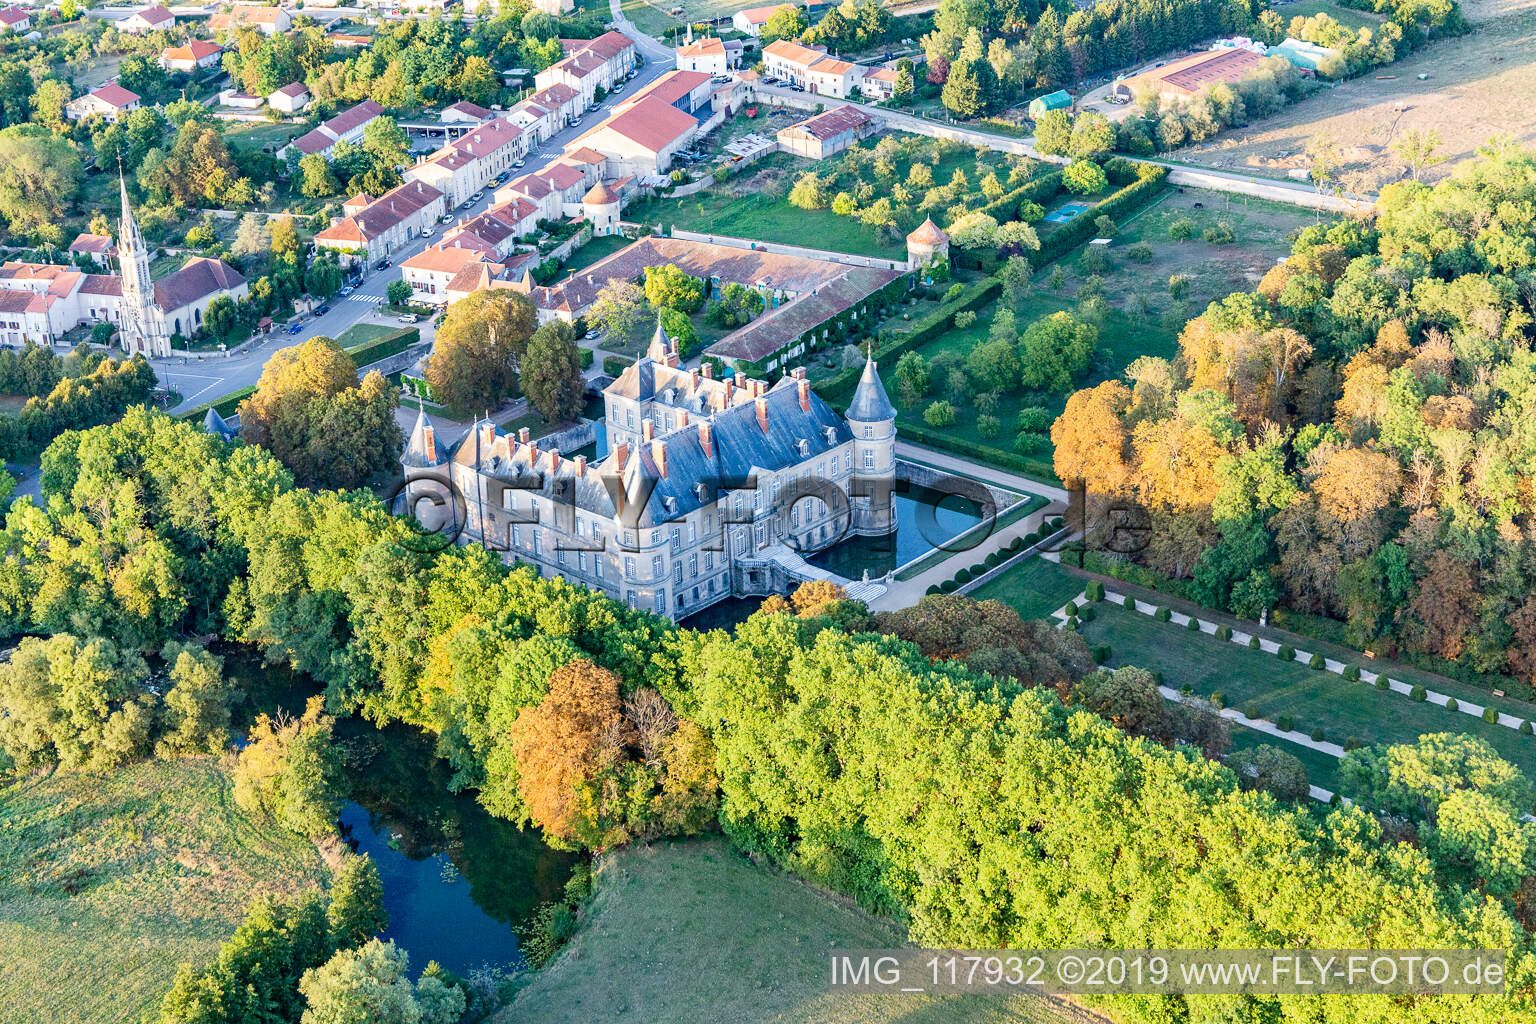 Chateau de Haroué in Haroué in the state Meurthe et Moselle, France seen from a drone